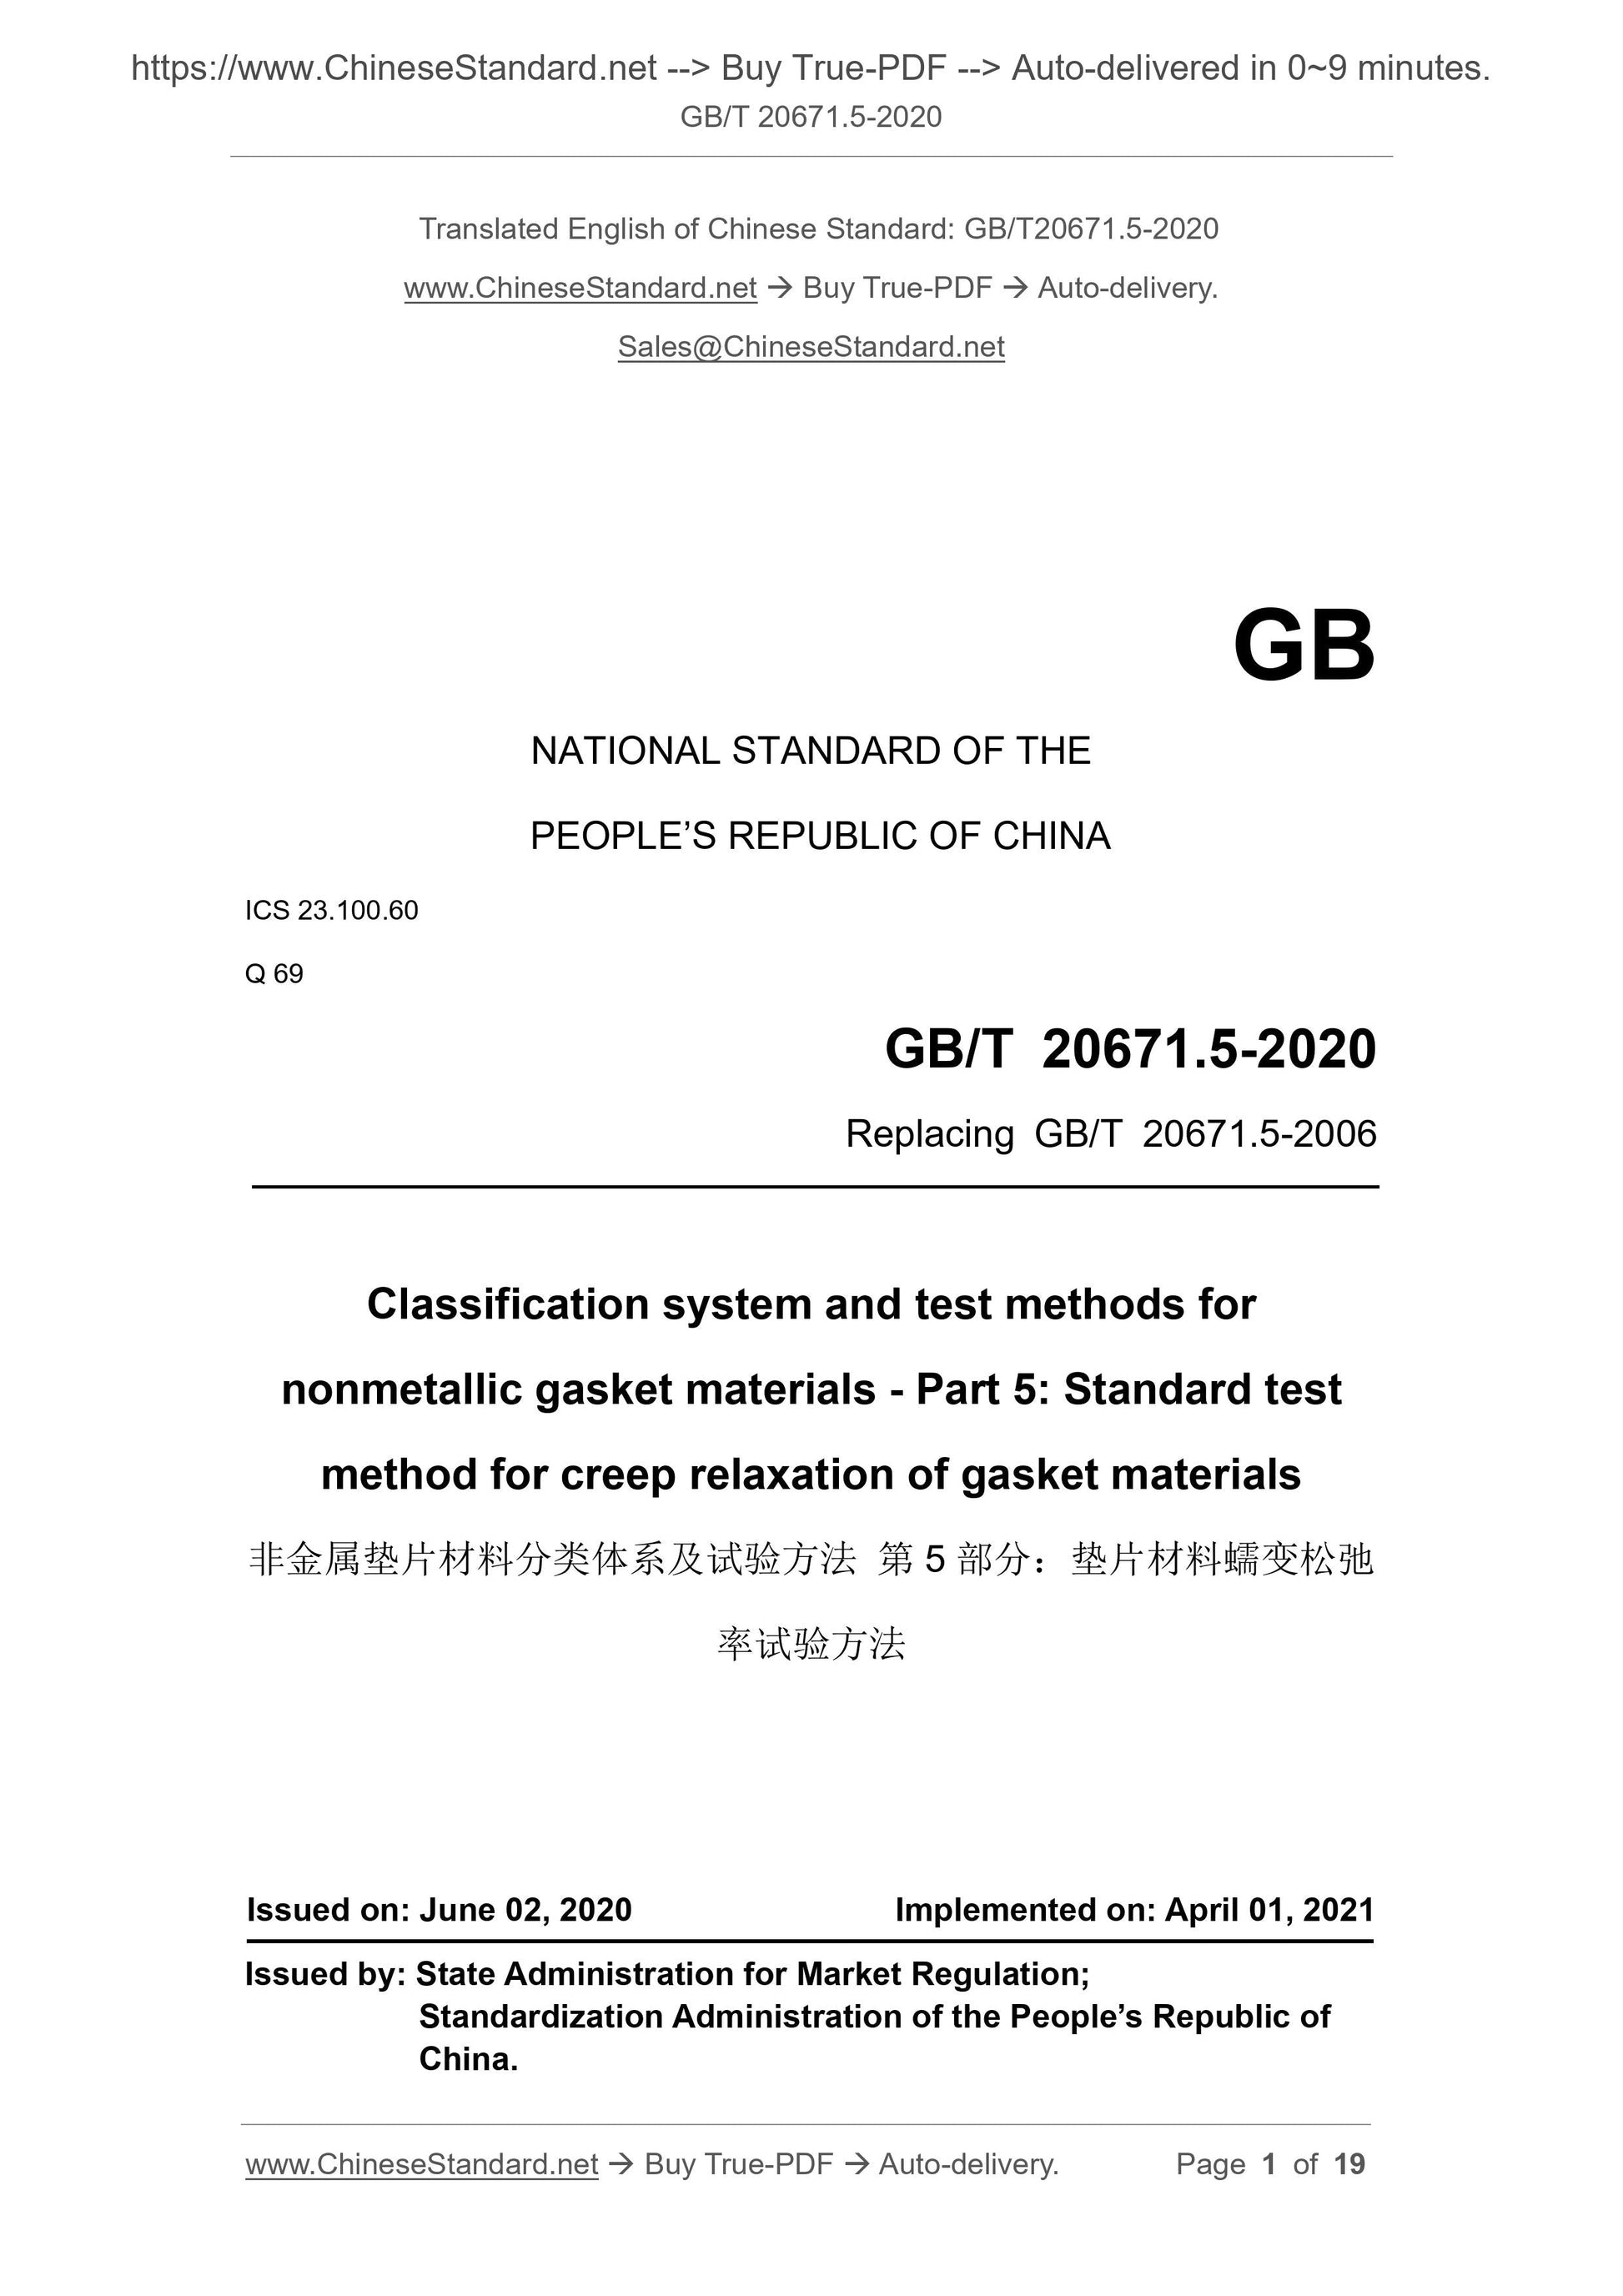 GB/T 20671.5-2020 Page 1